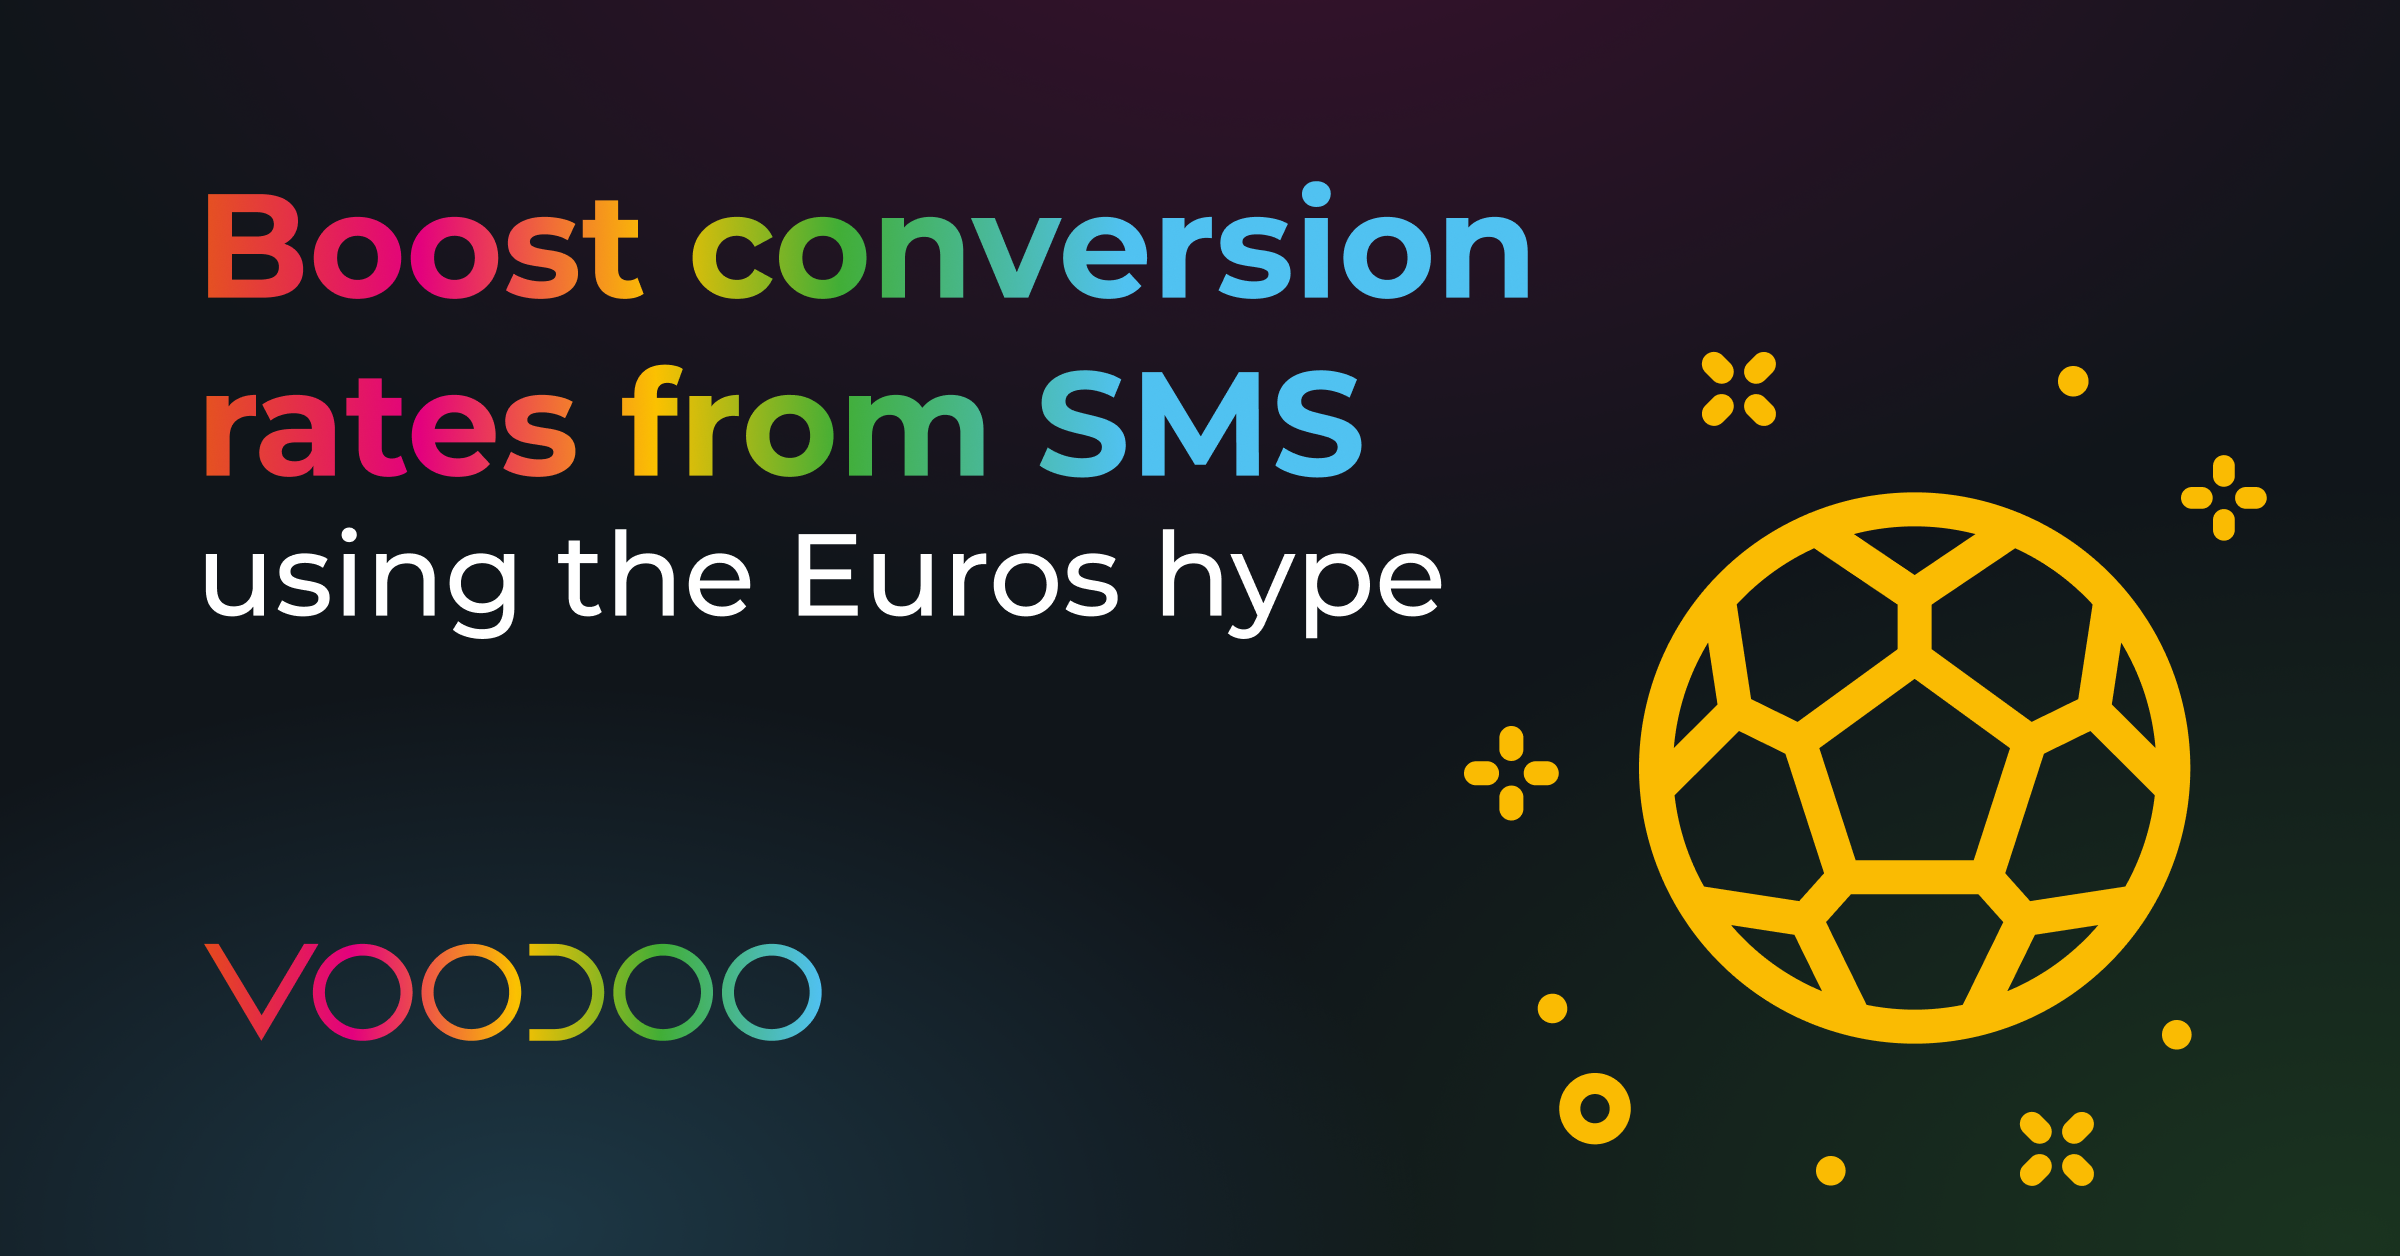 Why you should use SMS to get involved with the Euros hype